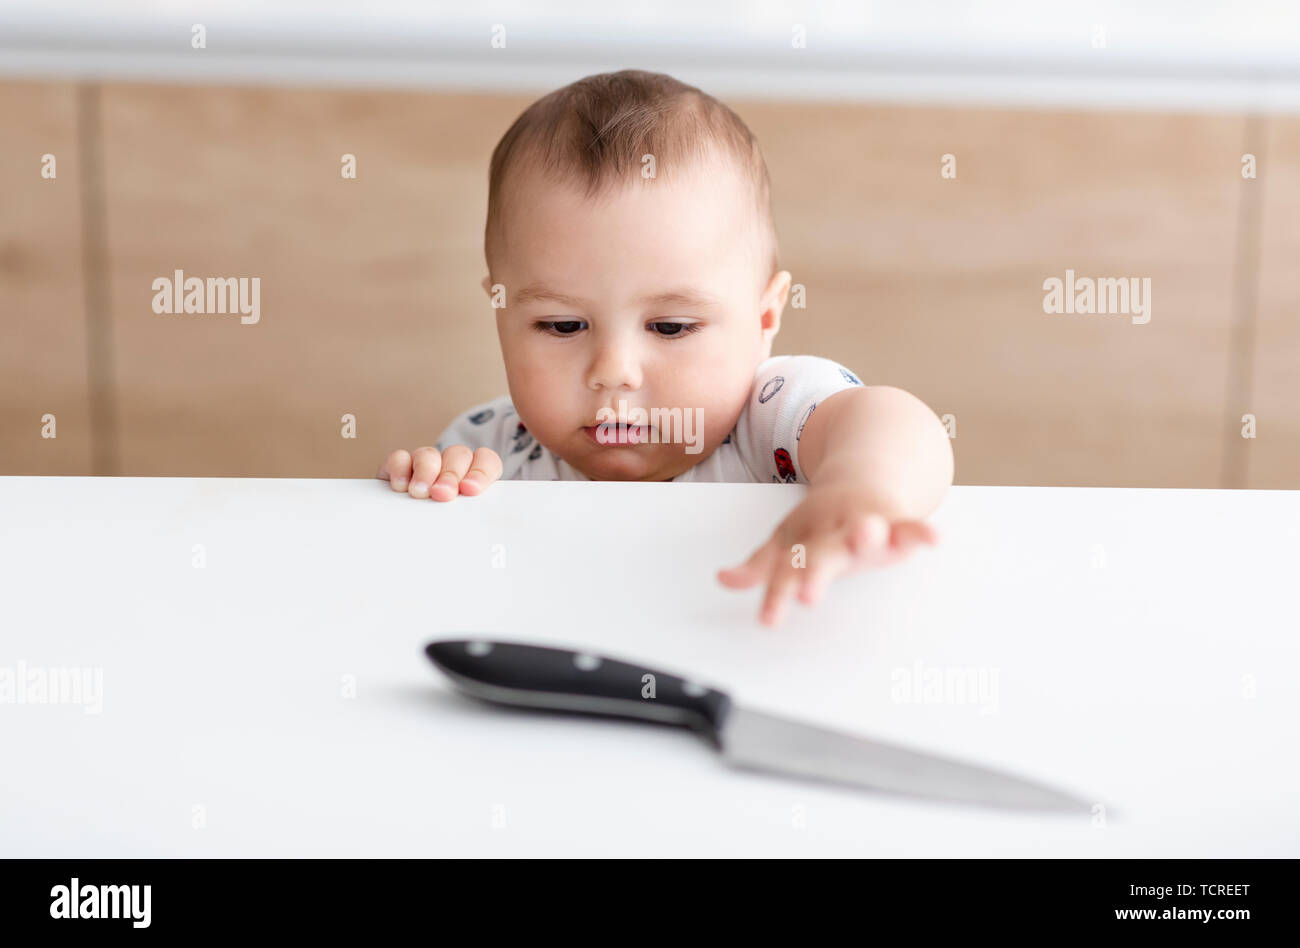 Dangerous situation in the kitchen. Child is trying to get a kitchen knife Stock Photo